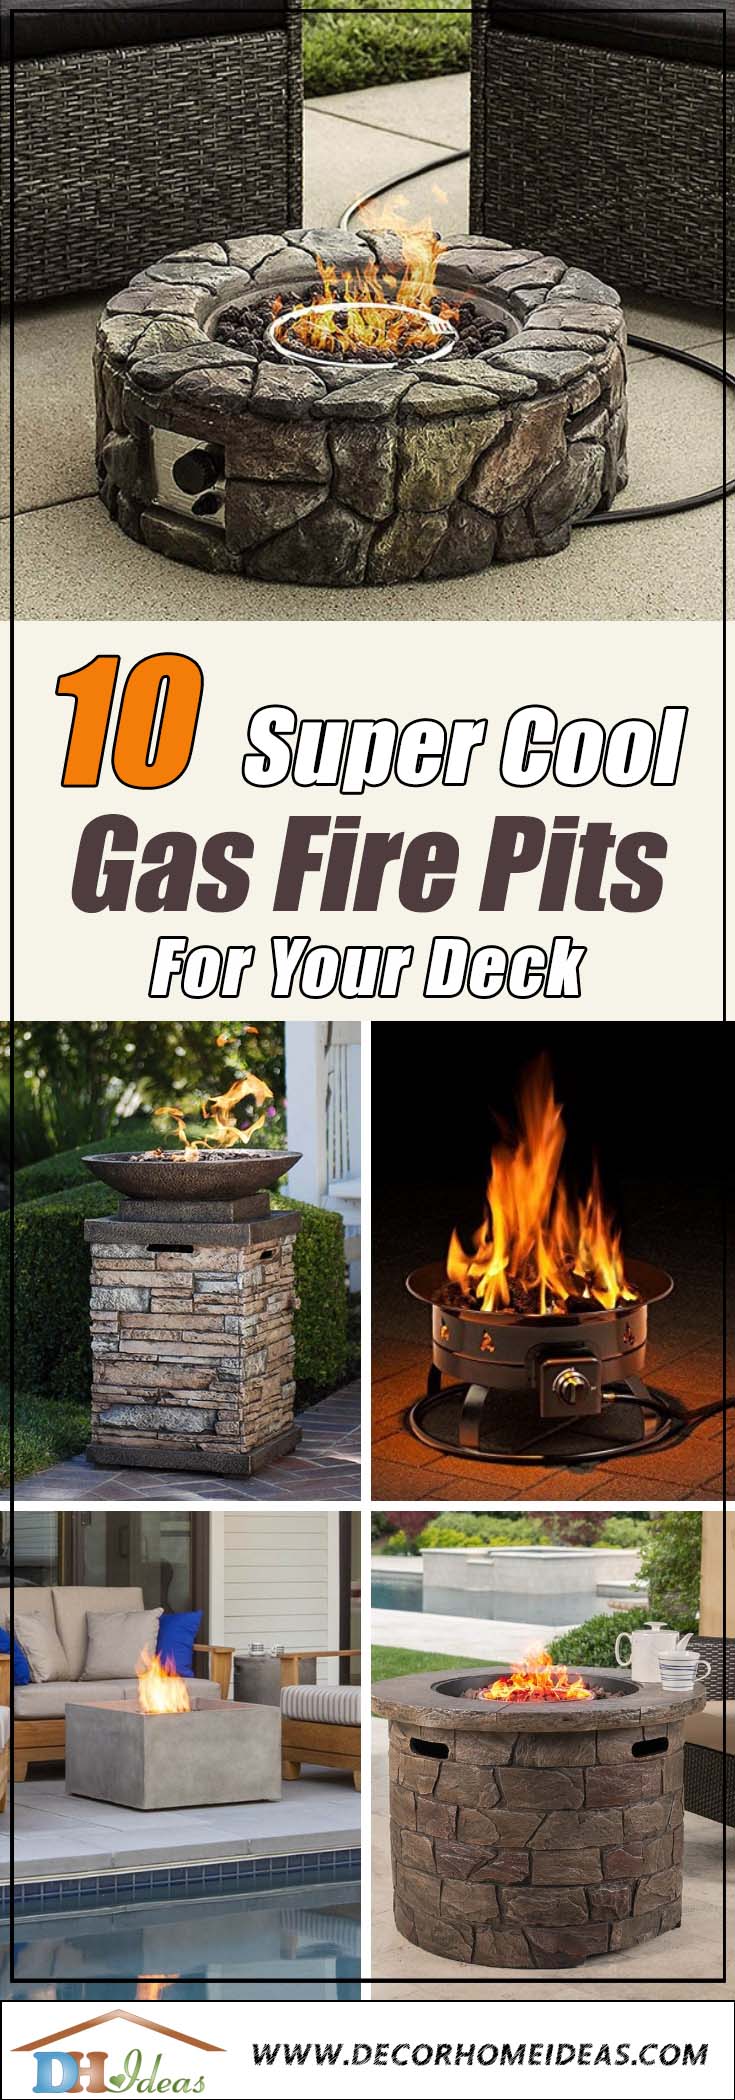 10 Best Gas Fire Pits For Deck In 2021, Can A Gas Fire Pit Be Used On Composite Deck